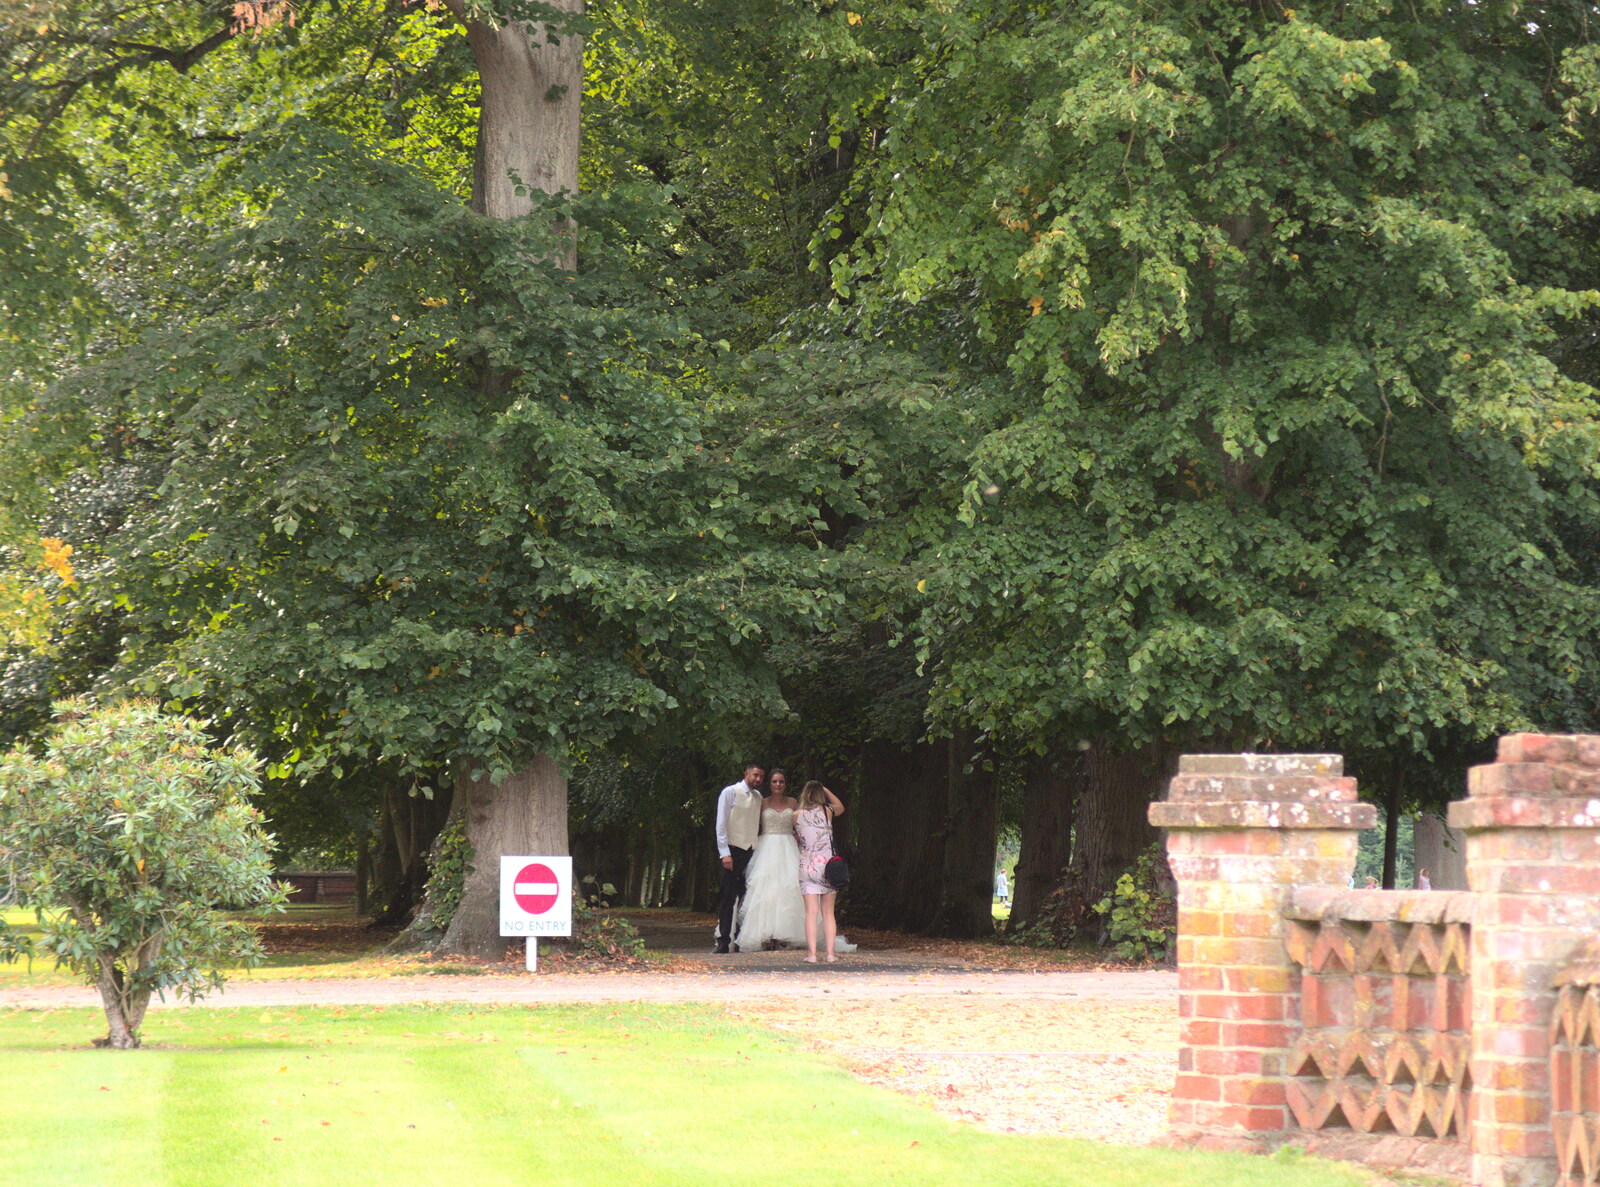 A wedding photo occurs up the Oaksmere's drive from The BSCC at Yaxley and the Hoxne Beer Festival, Suffolk - 31st August 2017